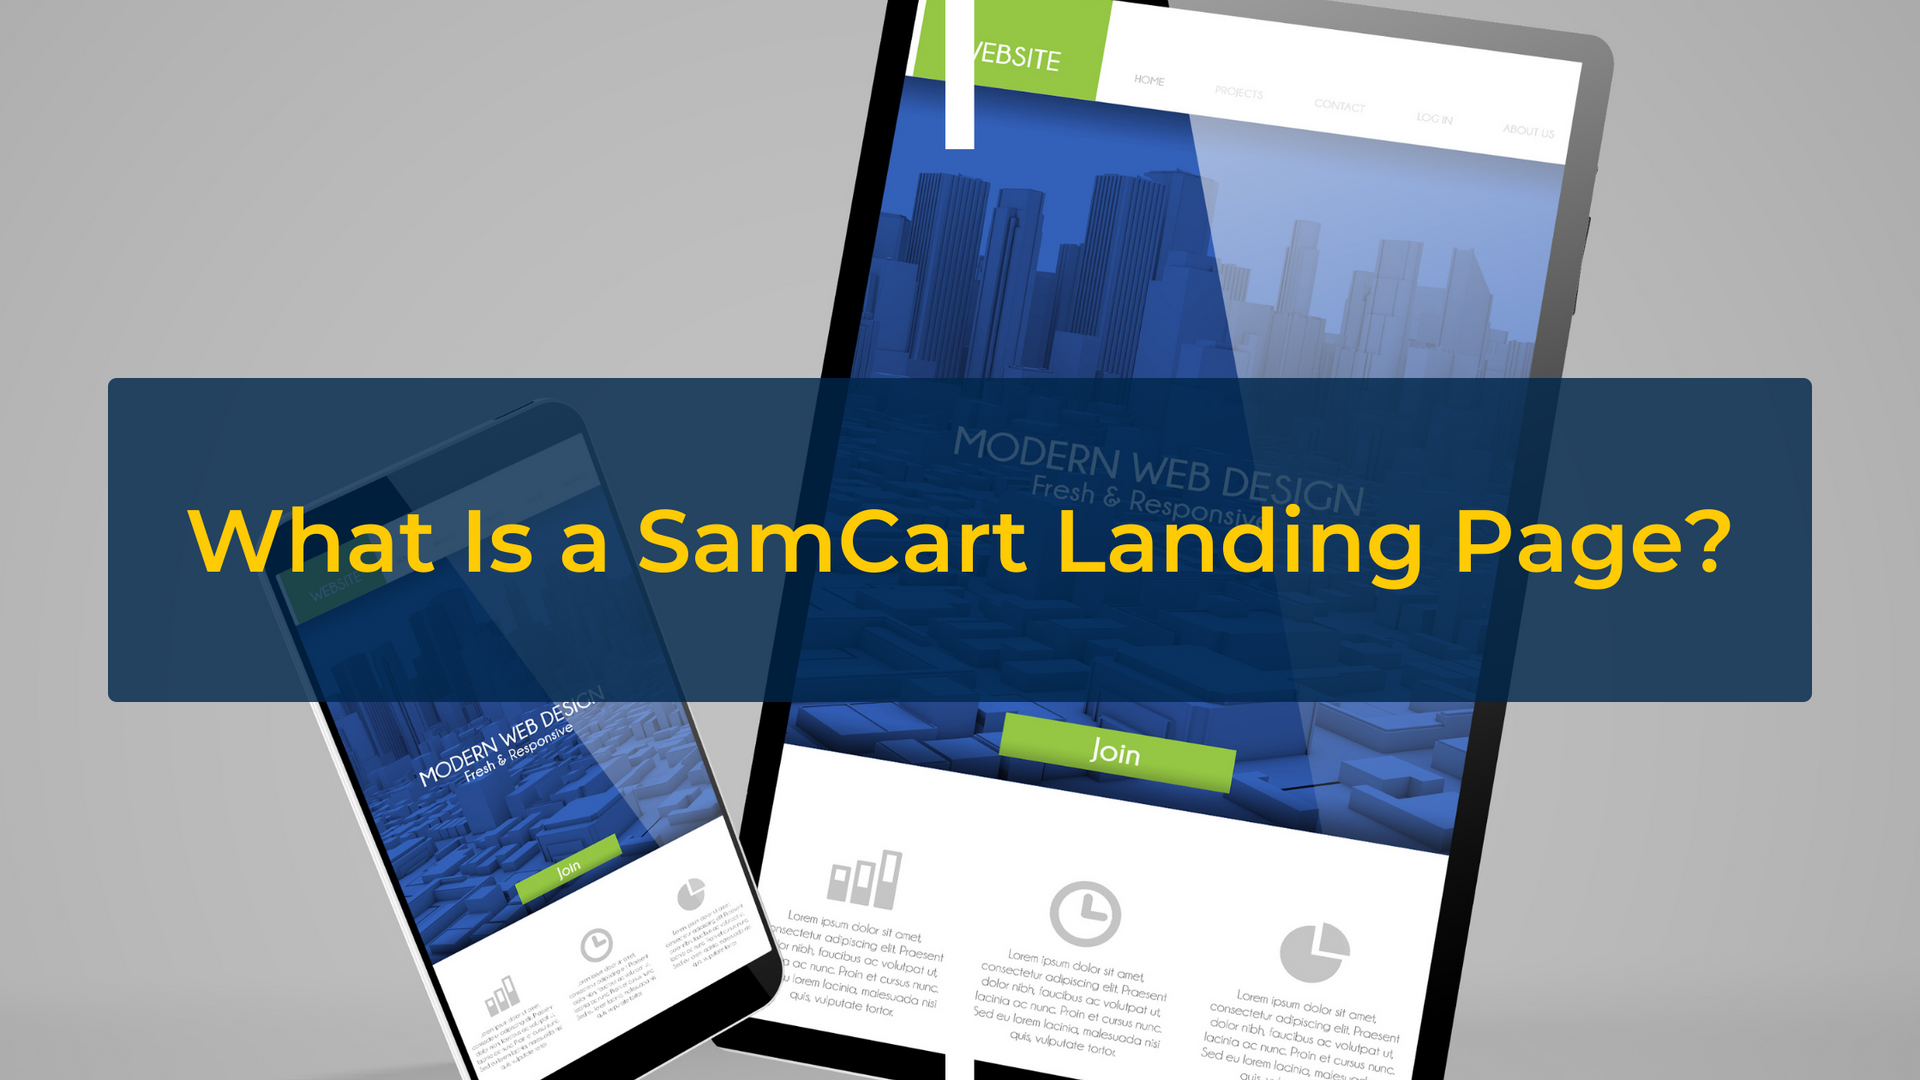 What Is a SamCart Landing Page?